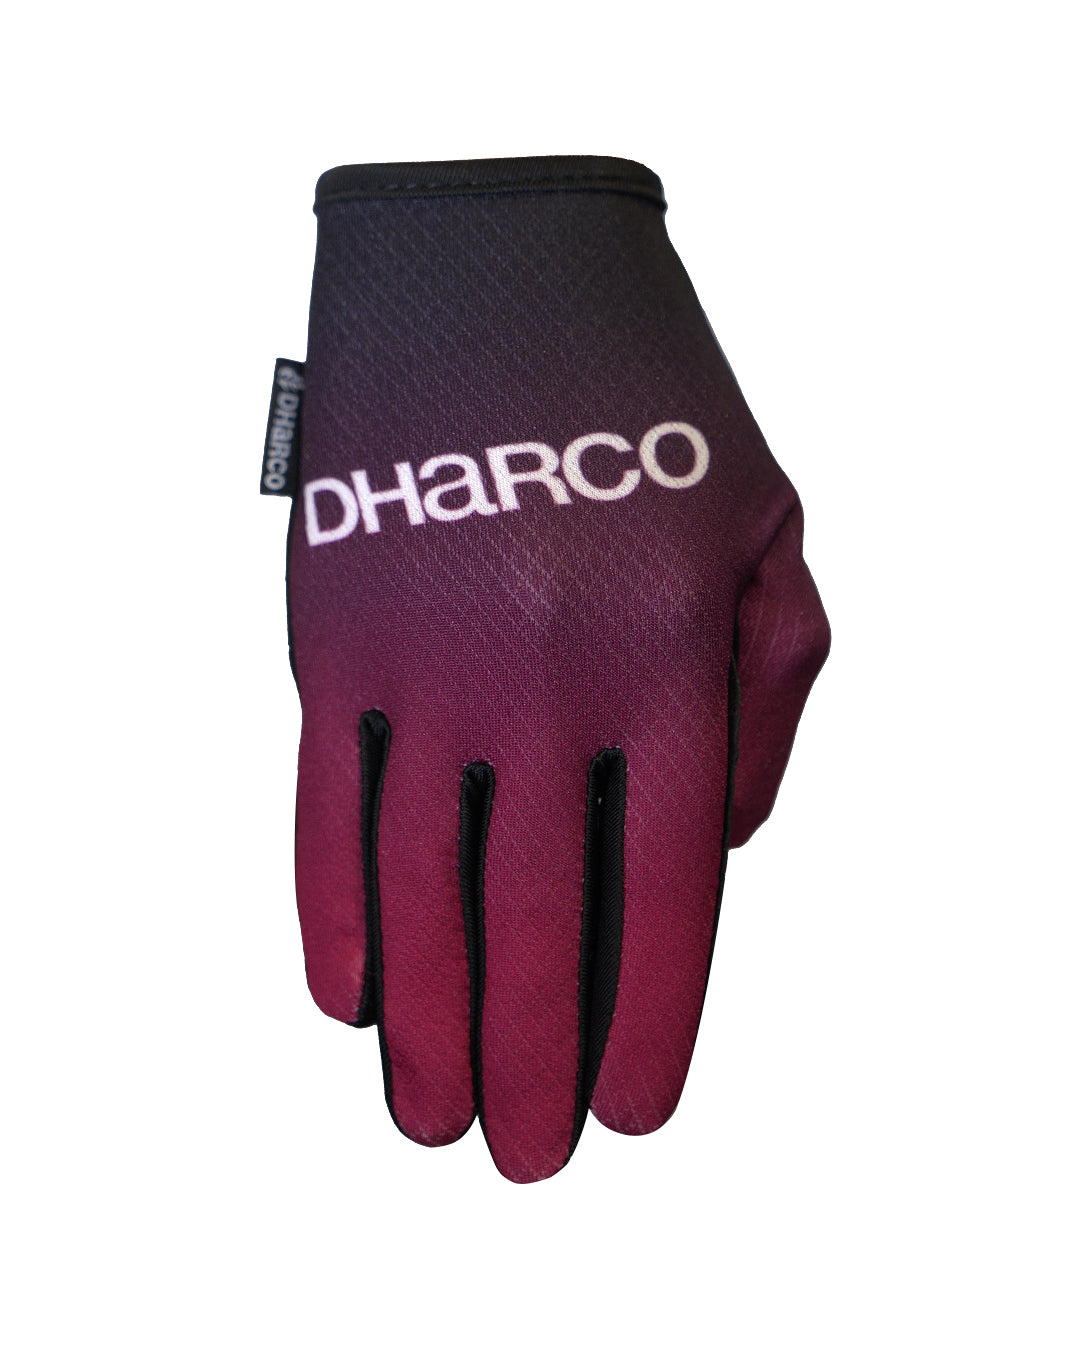 Dharco Youth Race Glove